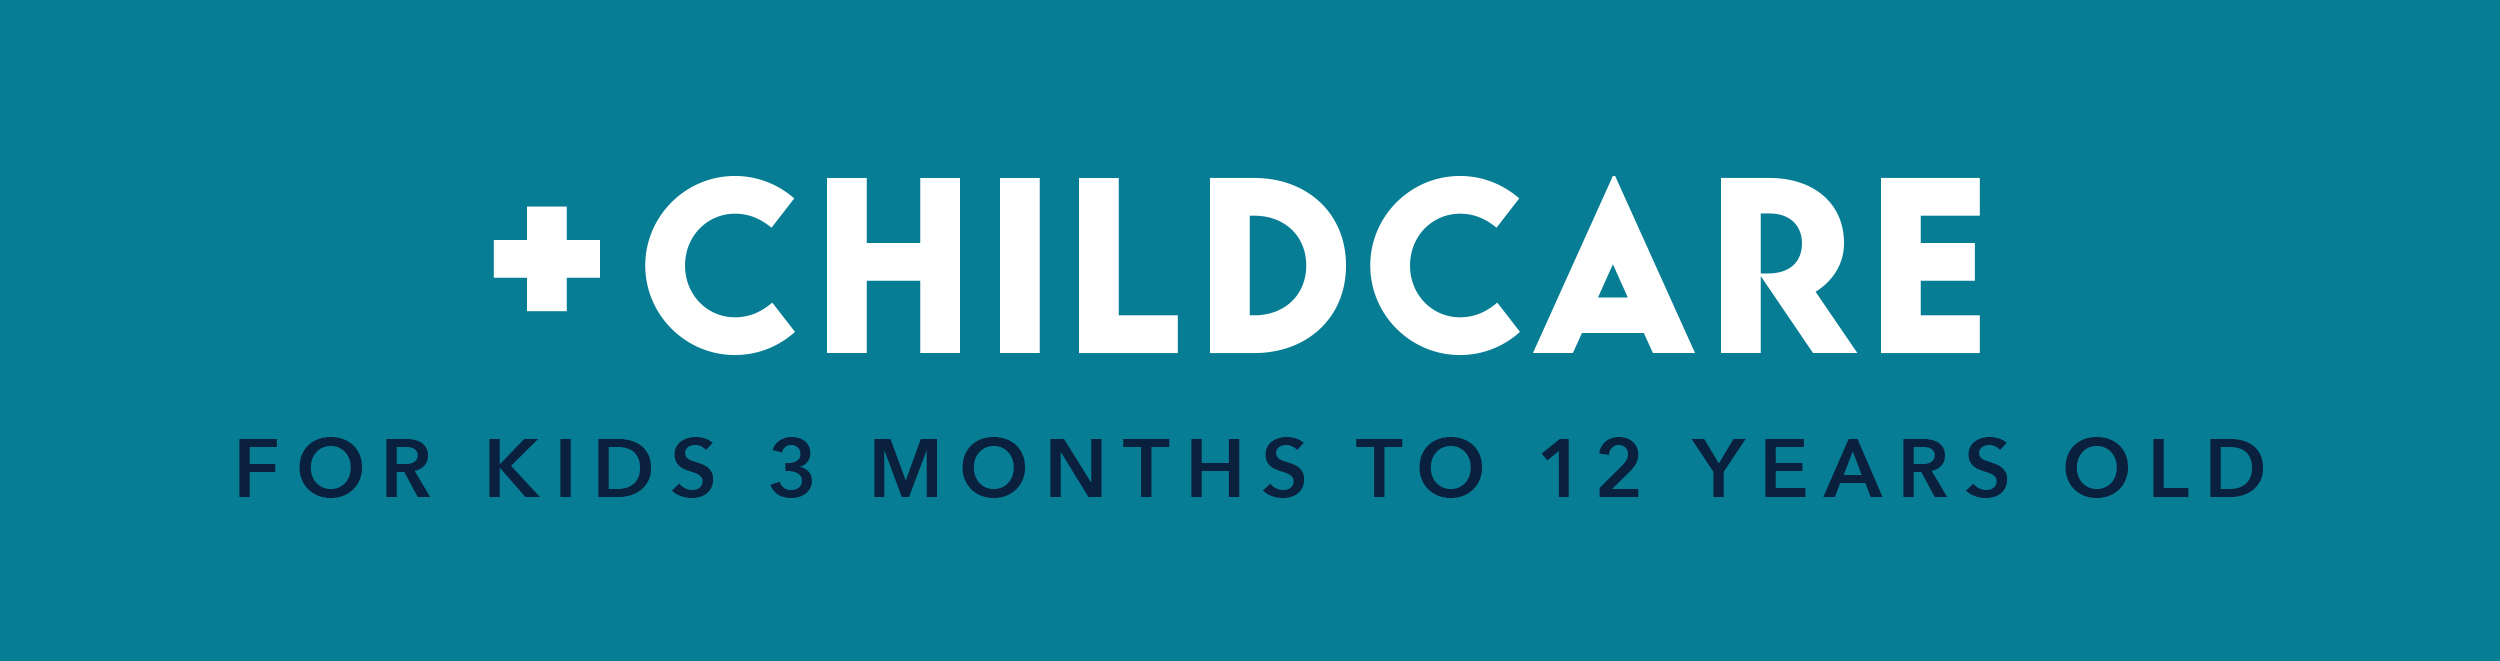 Childcare is available for kids 3 months to 12 years old